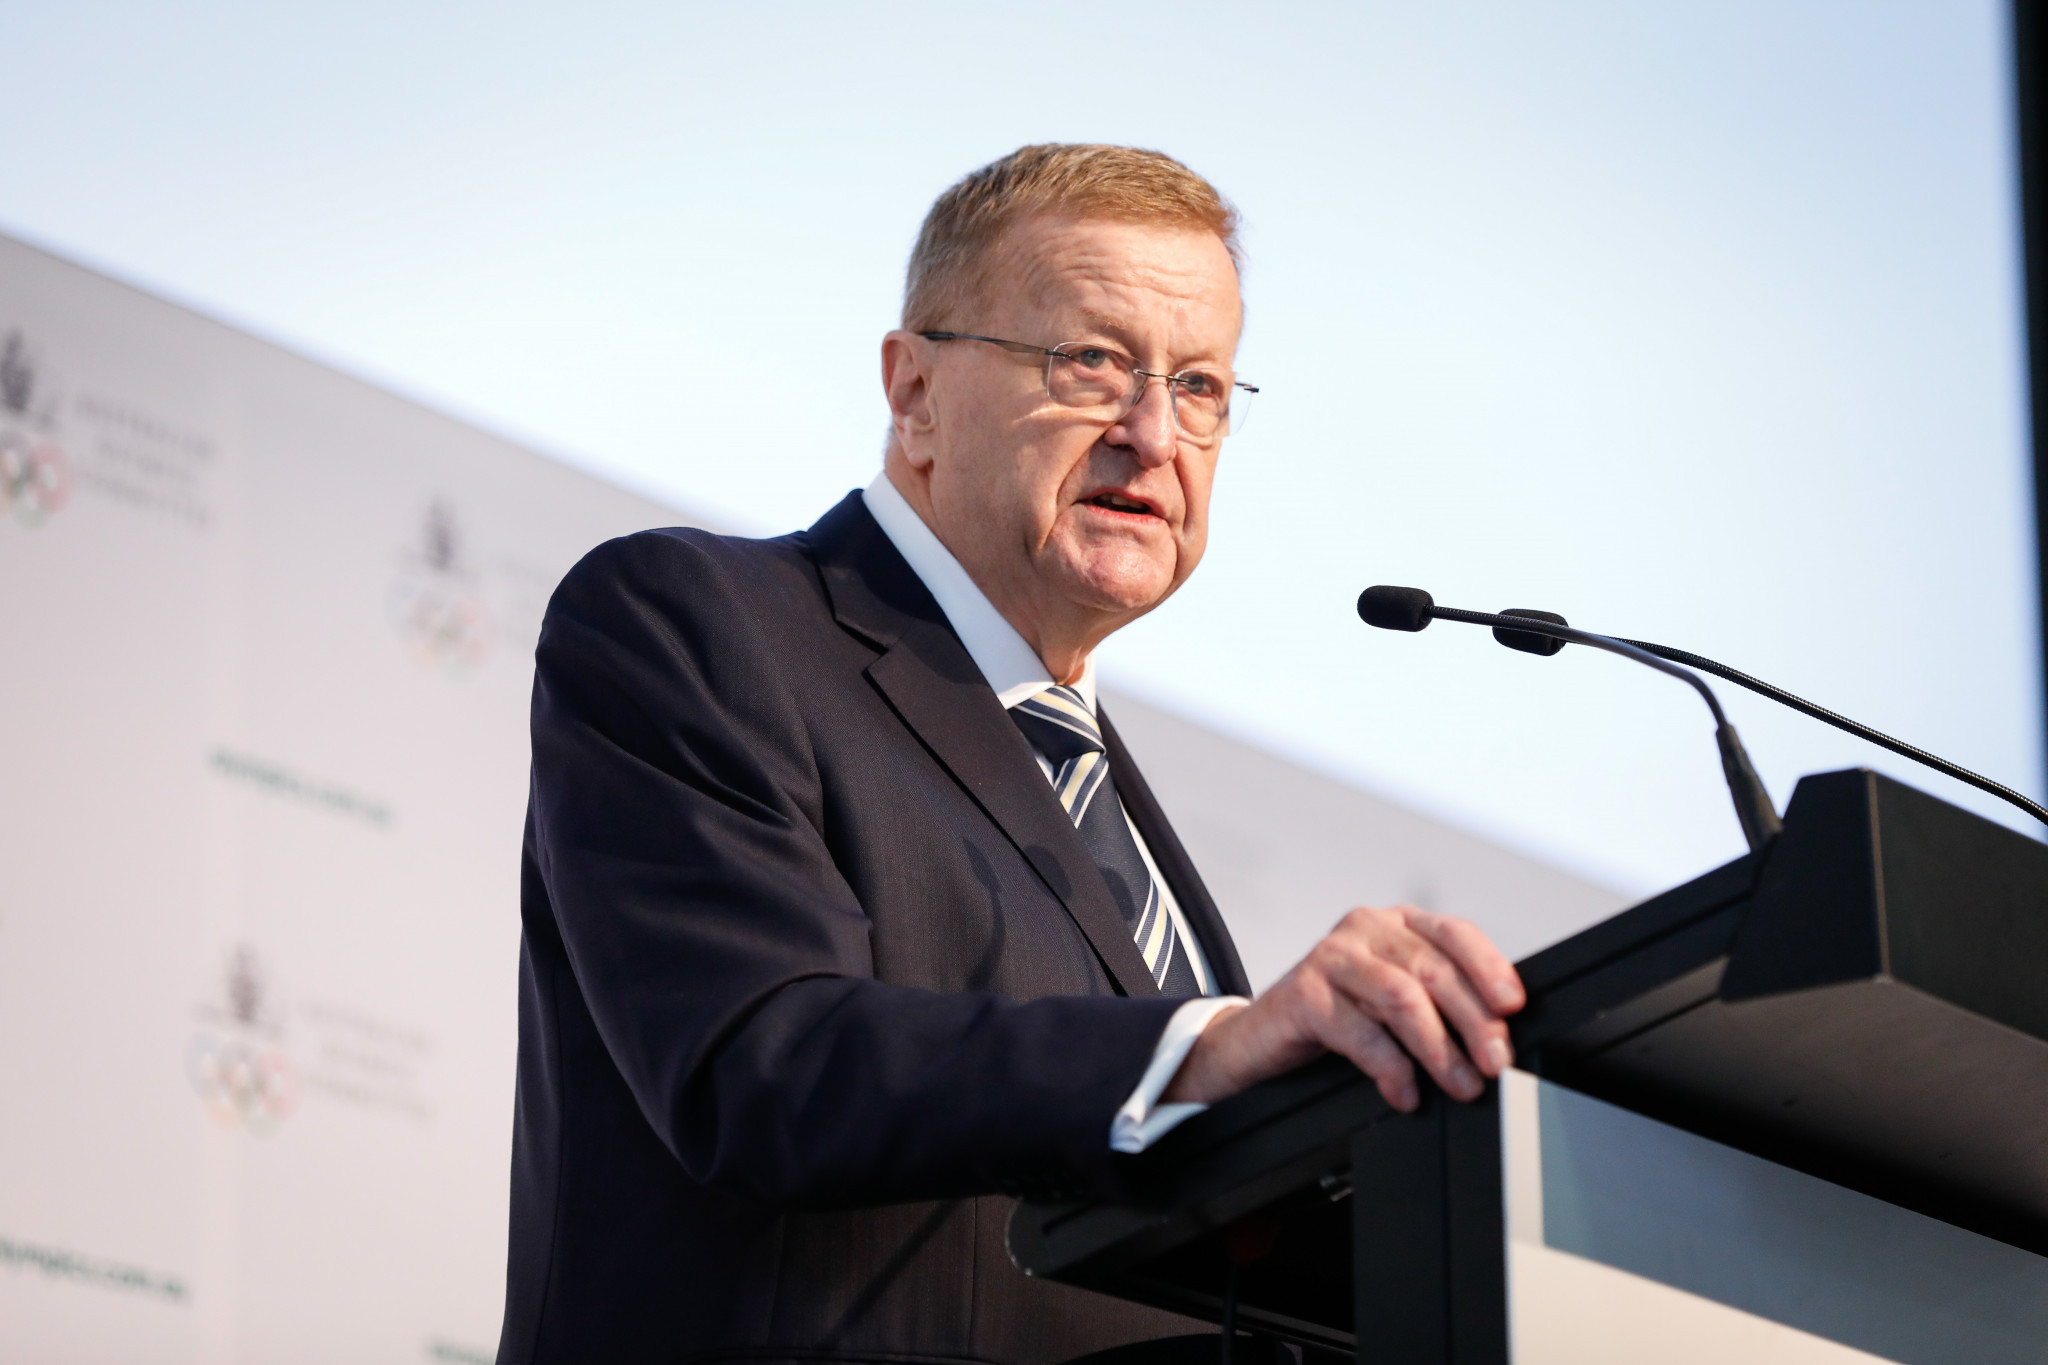 Coates says Brisbane 2032 on "last lap" as IOC begins due diligence prior to awarding Games